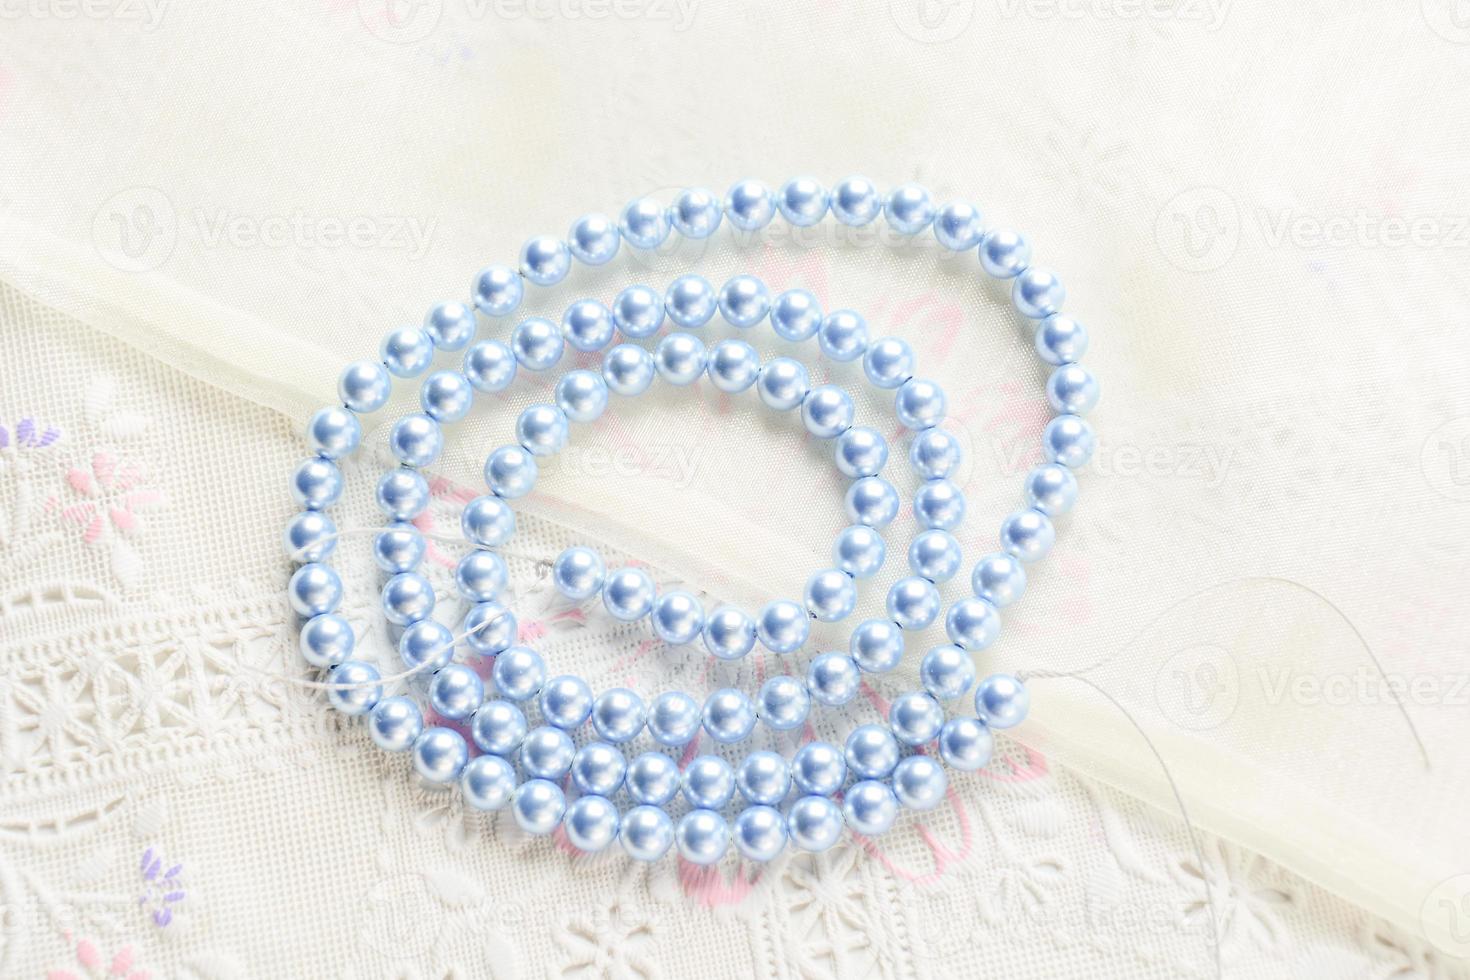 pearl necklace on white fabric background, Close up shot of glass pearls photo